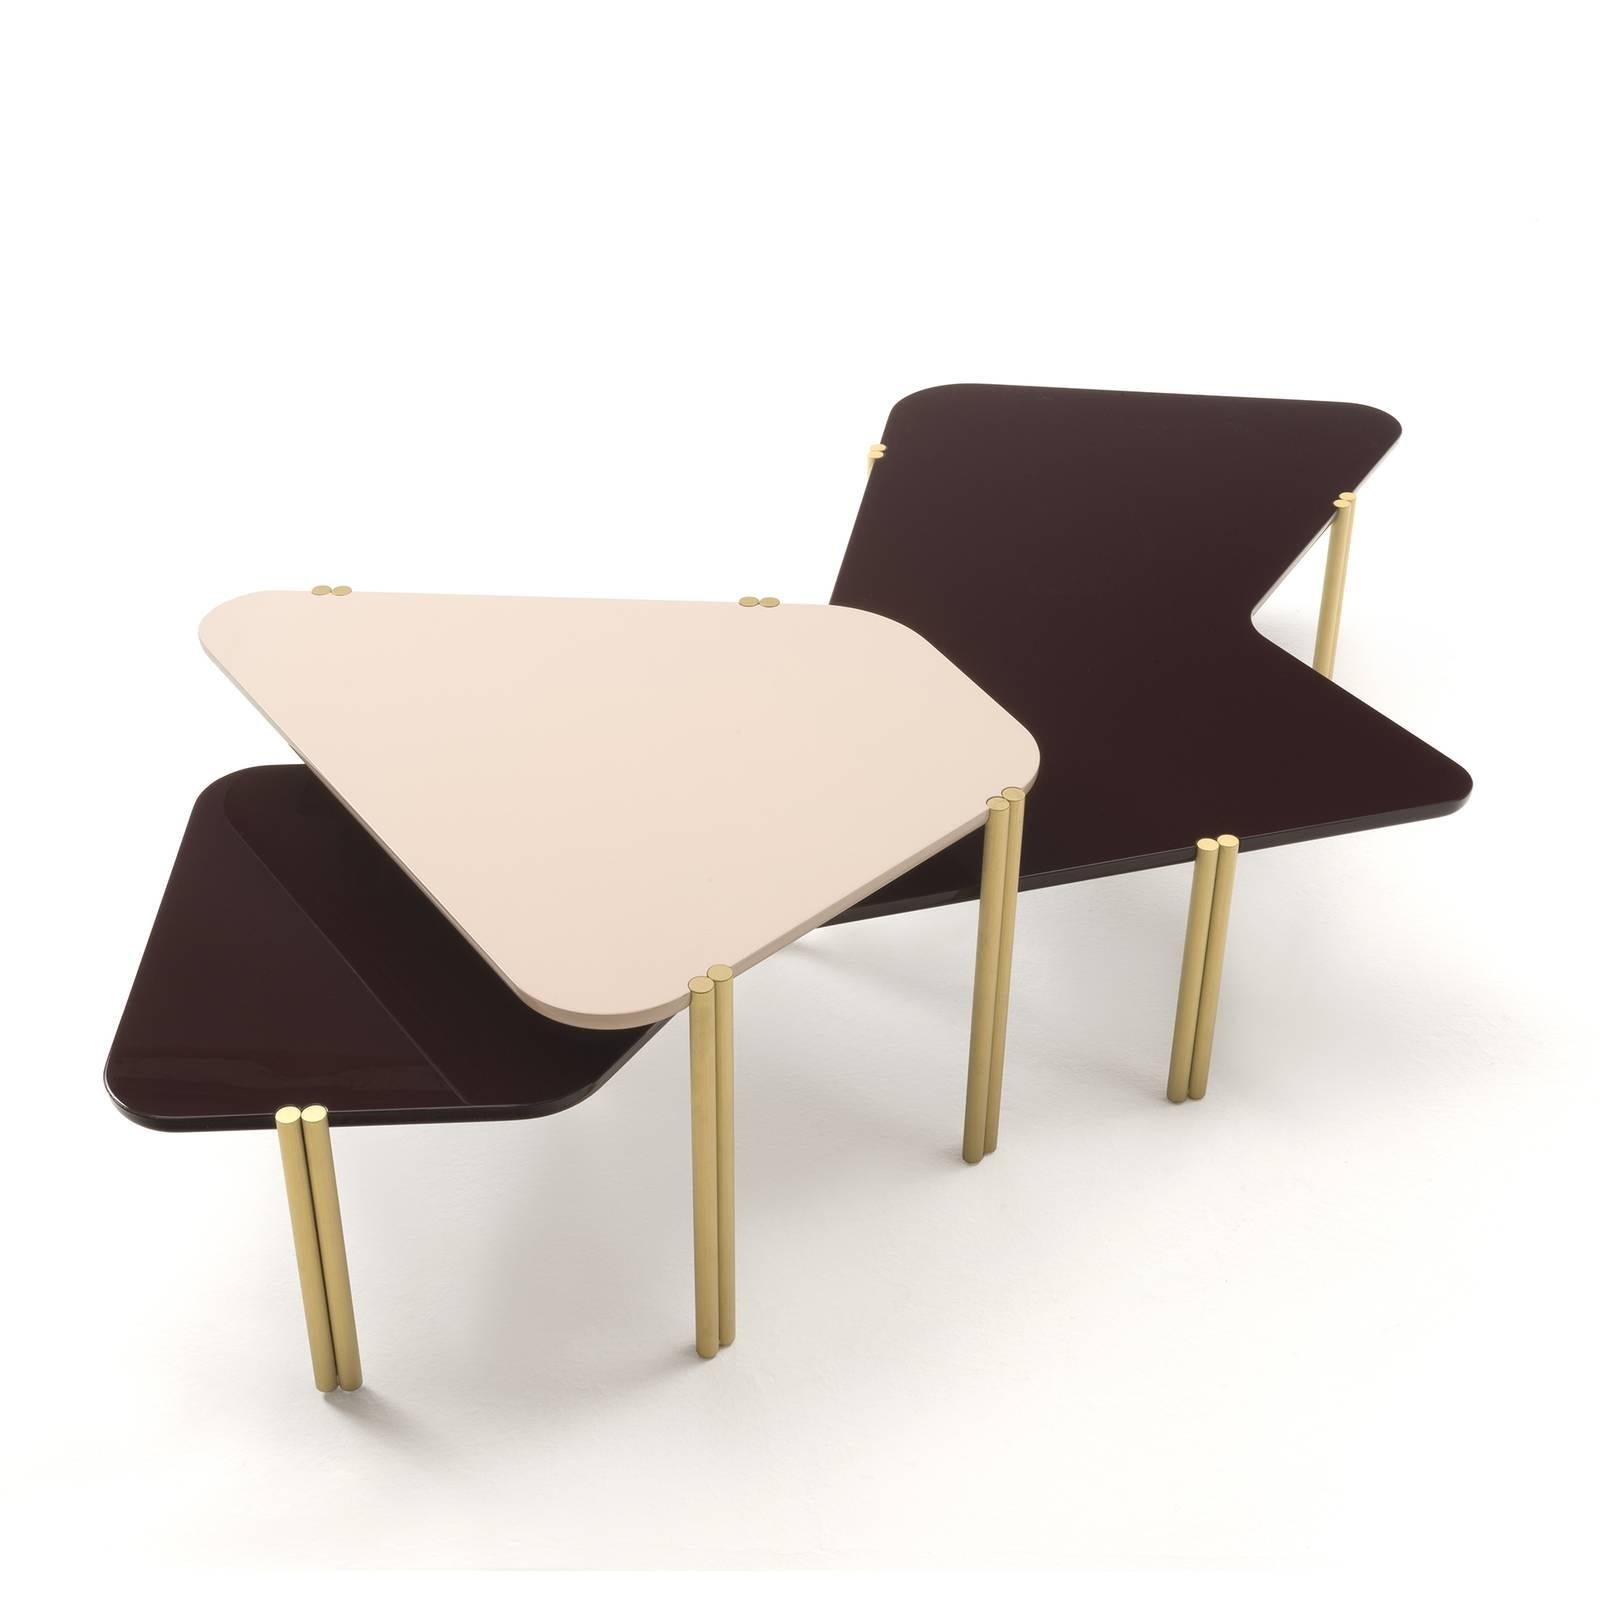 Italian Dark & Light Jean Stackable Tables by Durame For Sale